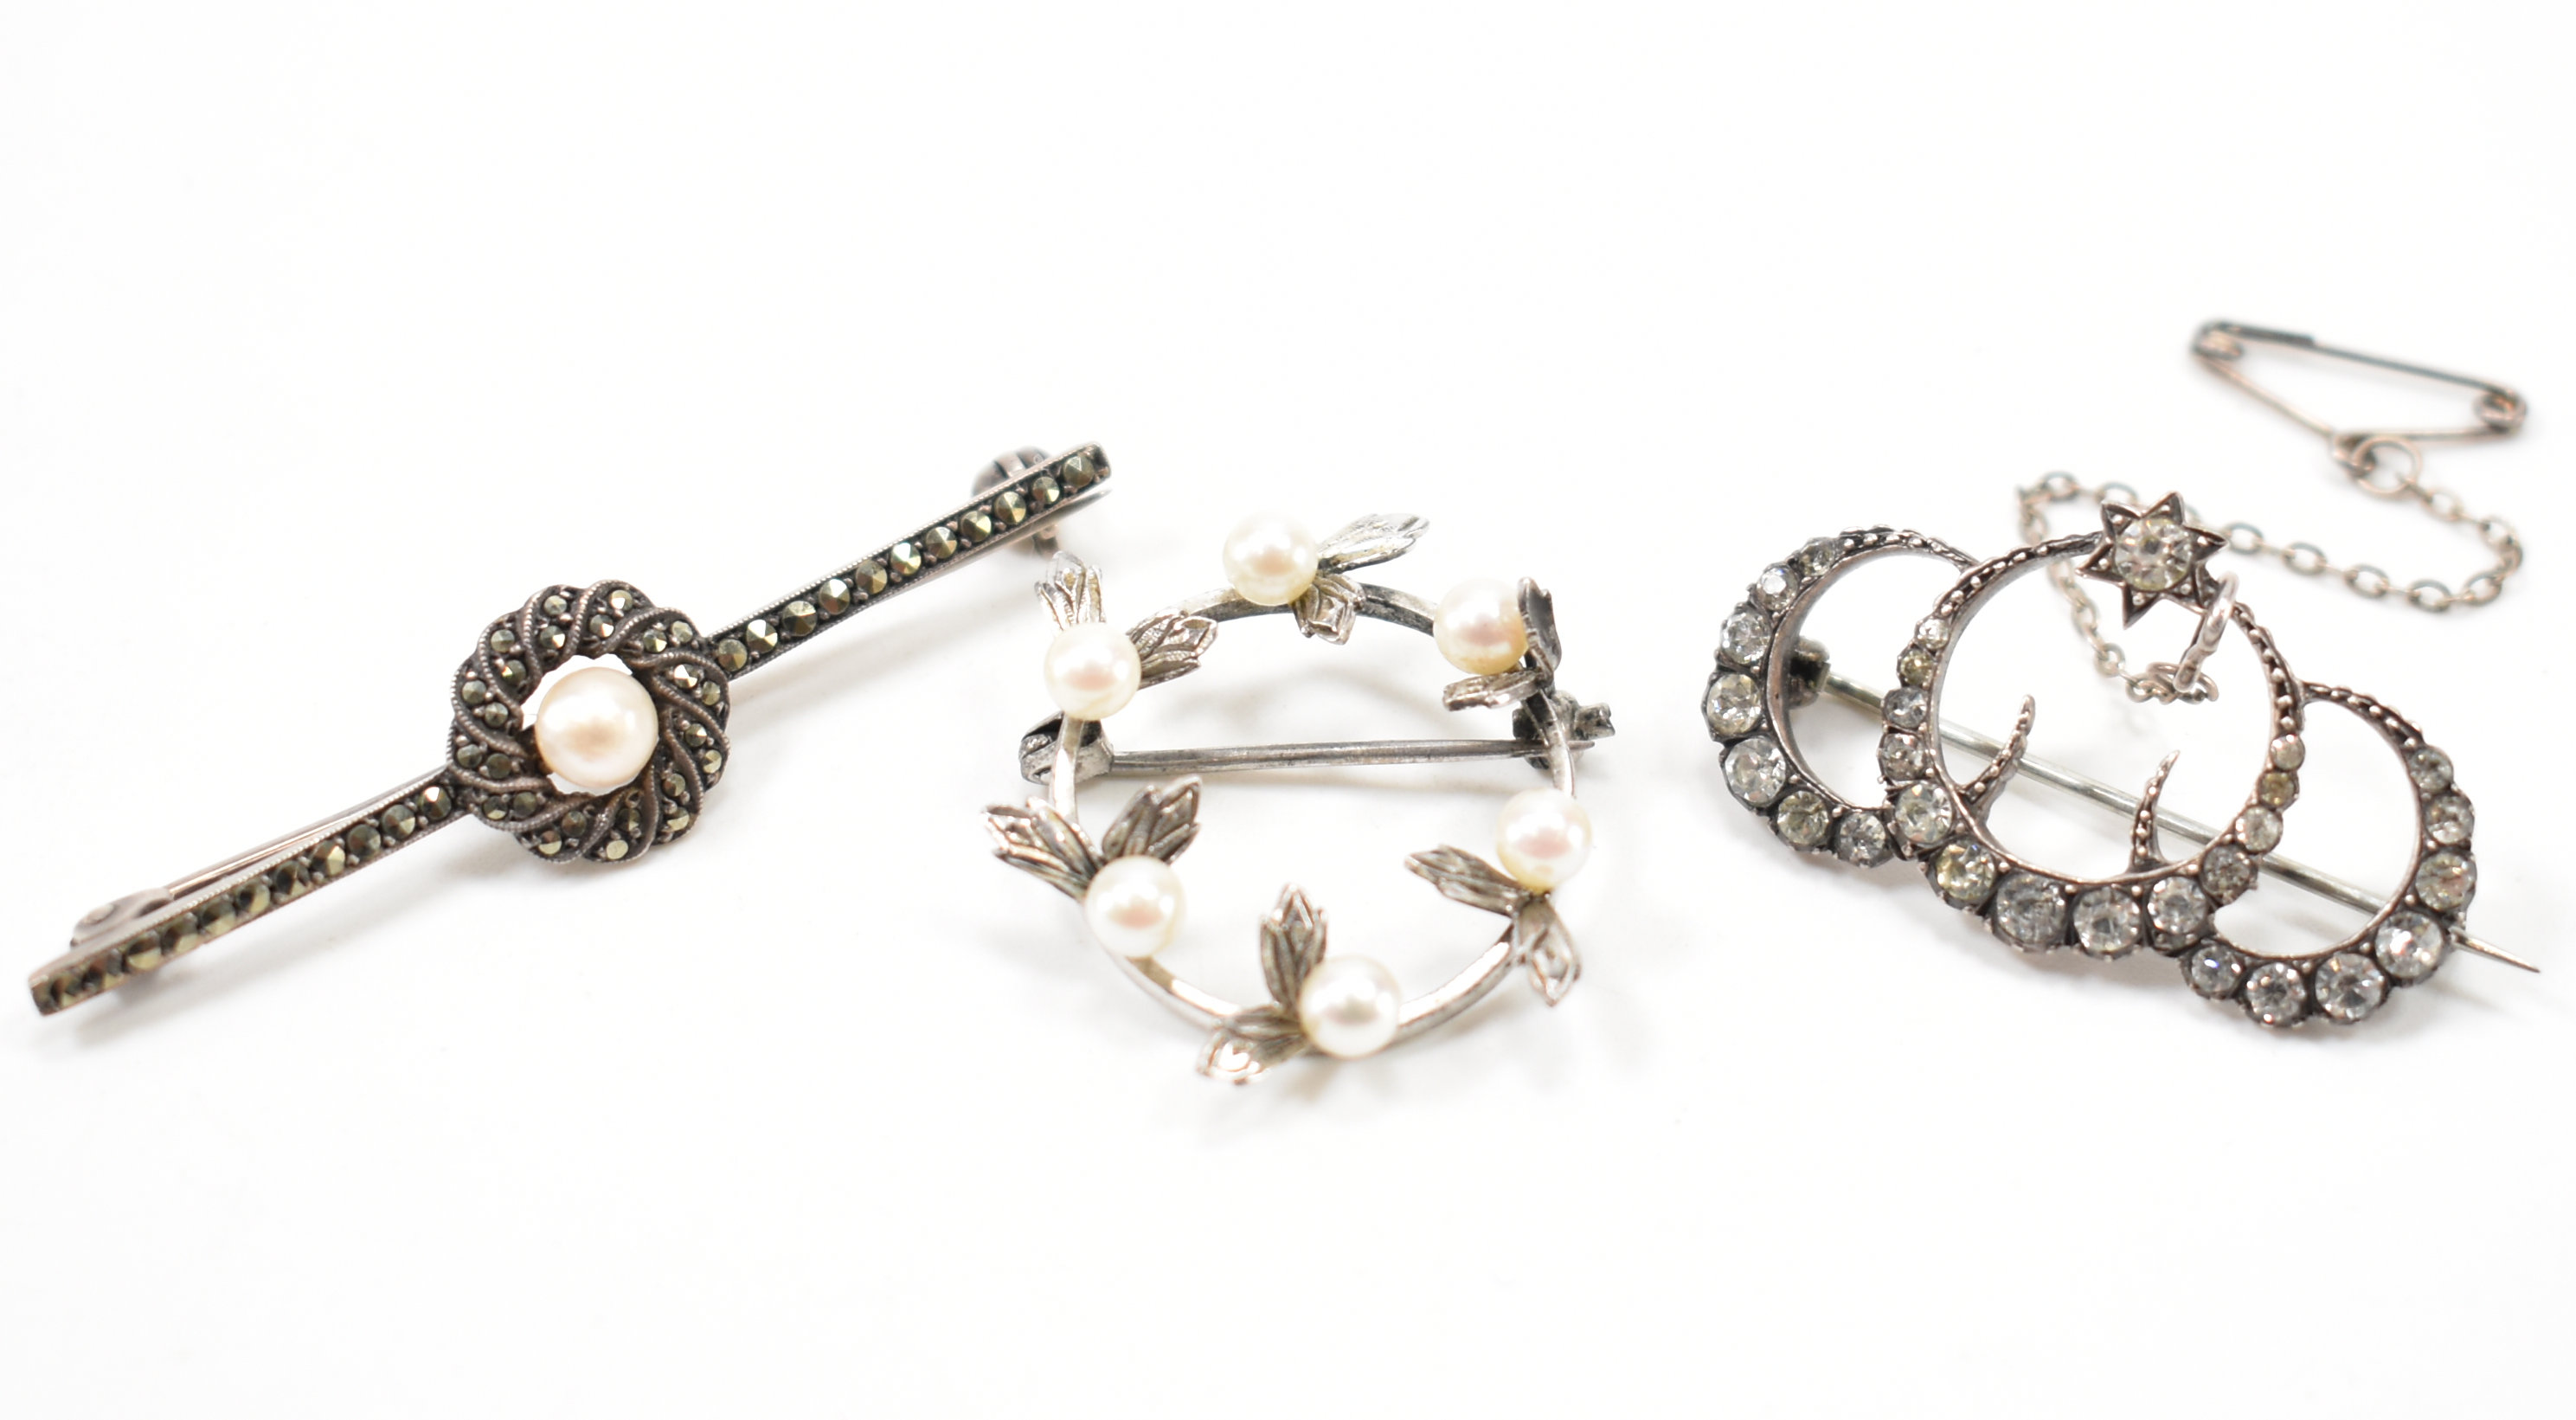 COLLECTION OF SILVER EARLY 20TH CENTURY BROOCHES